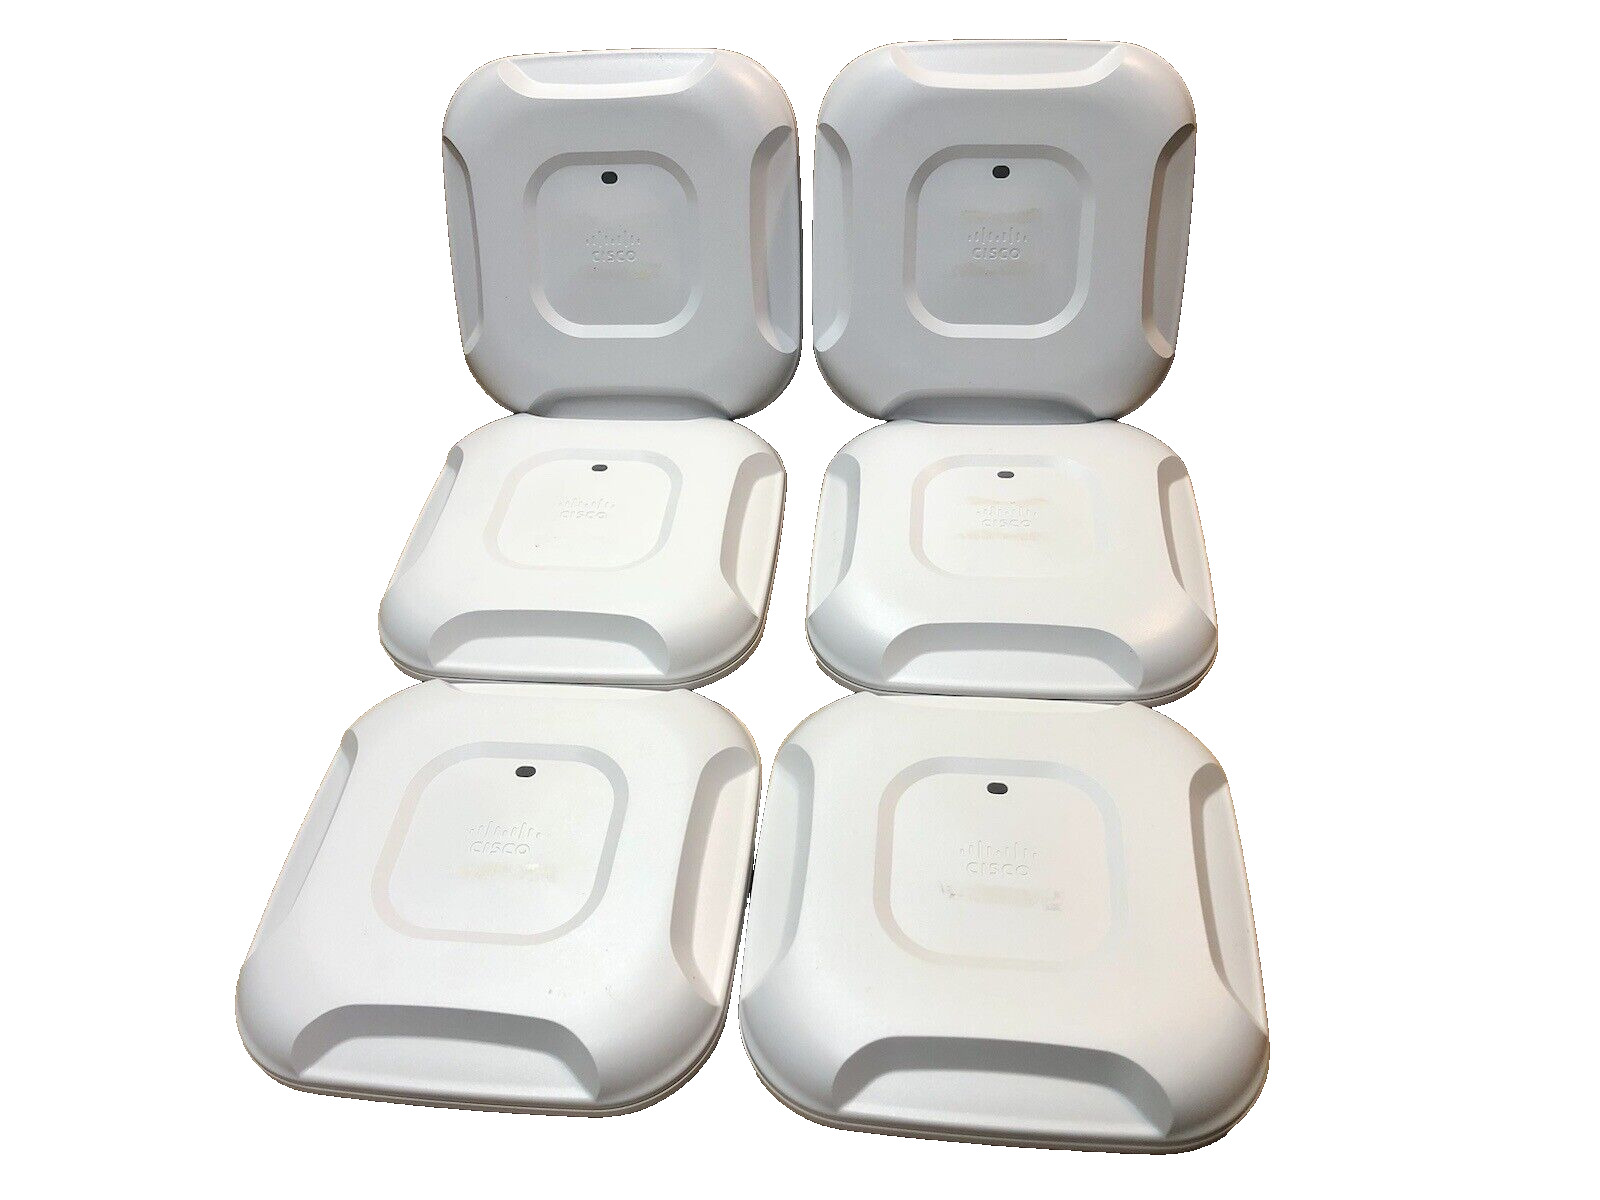 6 Pack-Cisco AIR-CAP3702I-A-K9 Aironet 3702I 1.3Gbps Wireless Access Points Used